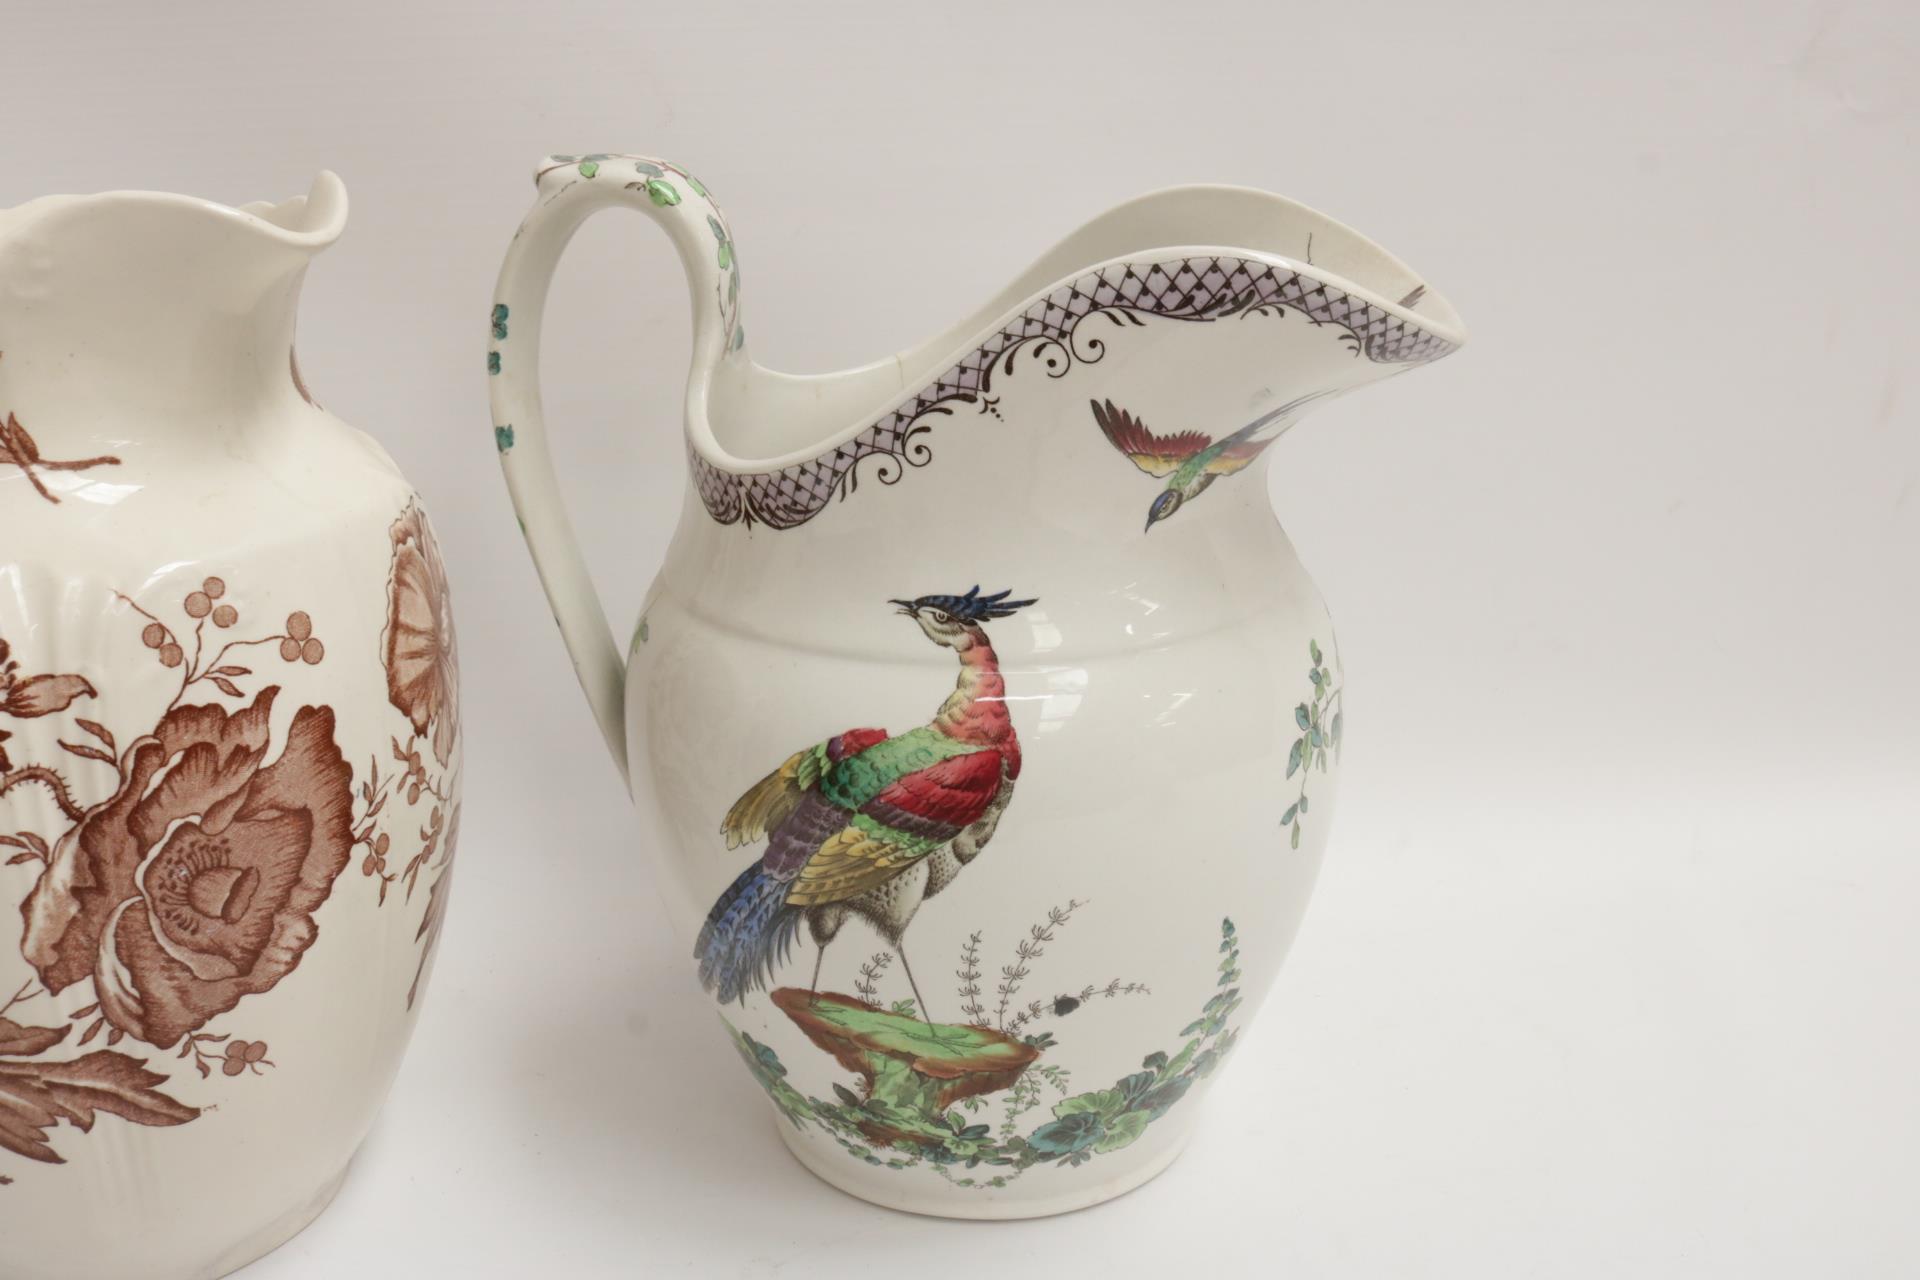 4 x Victorian Style Jugs, various sizes, including Masons, Spode (one has slight damage) - Image 5 of 8